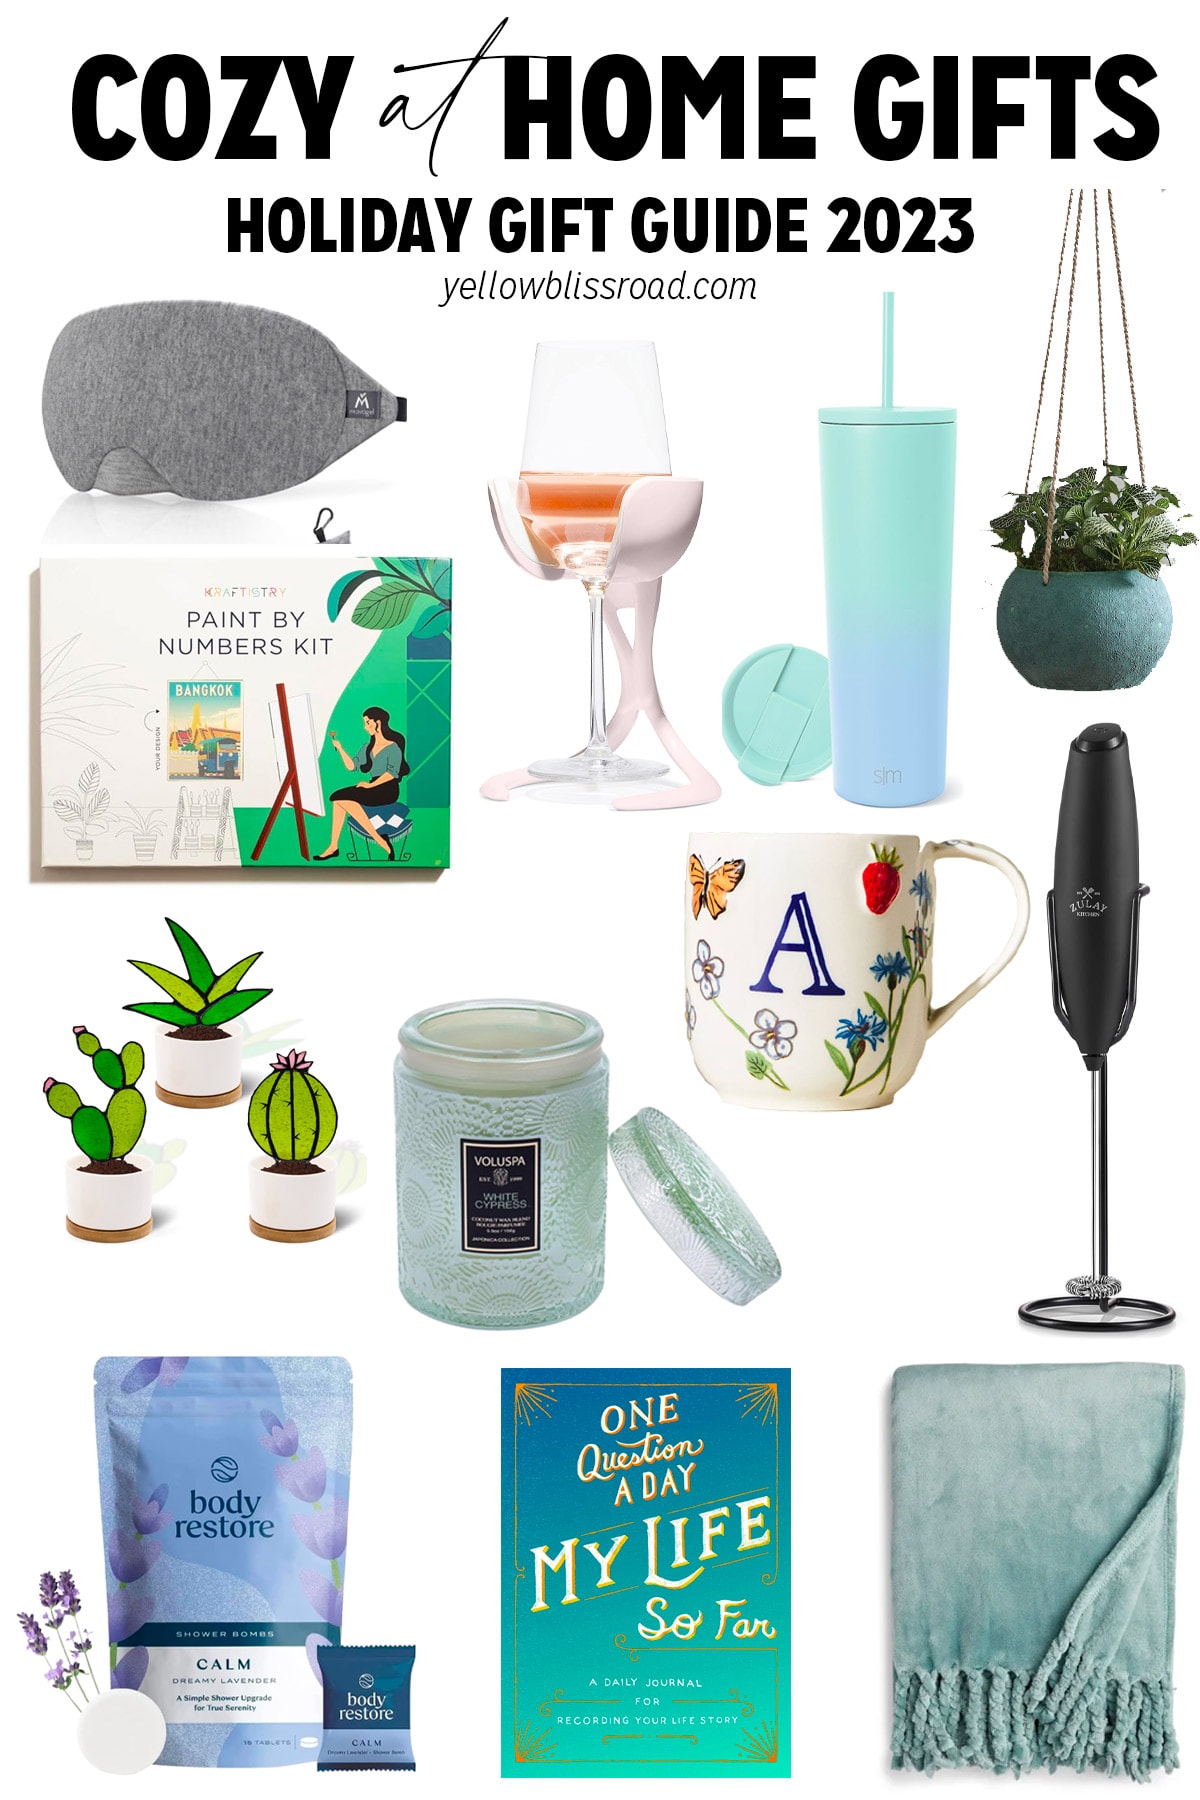 Verdict's gift guides: Great Christmas gift ideas to help you navigate the  holiday season - Verdict